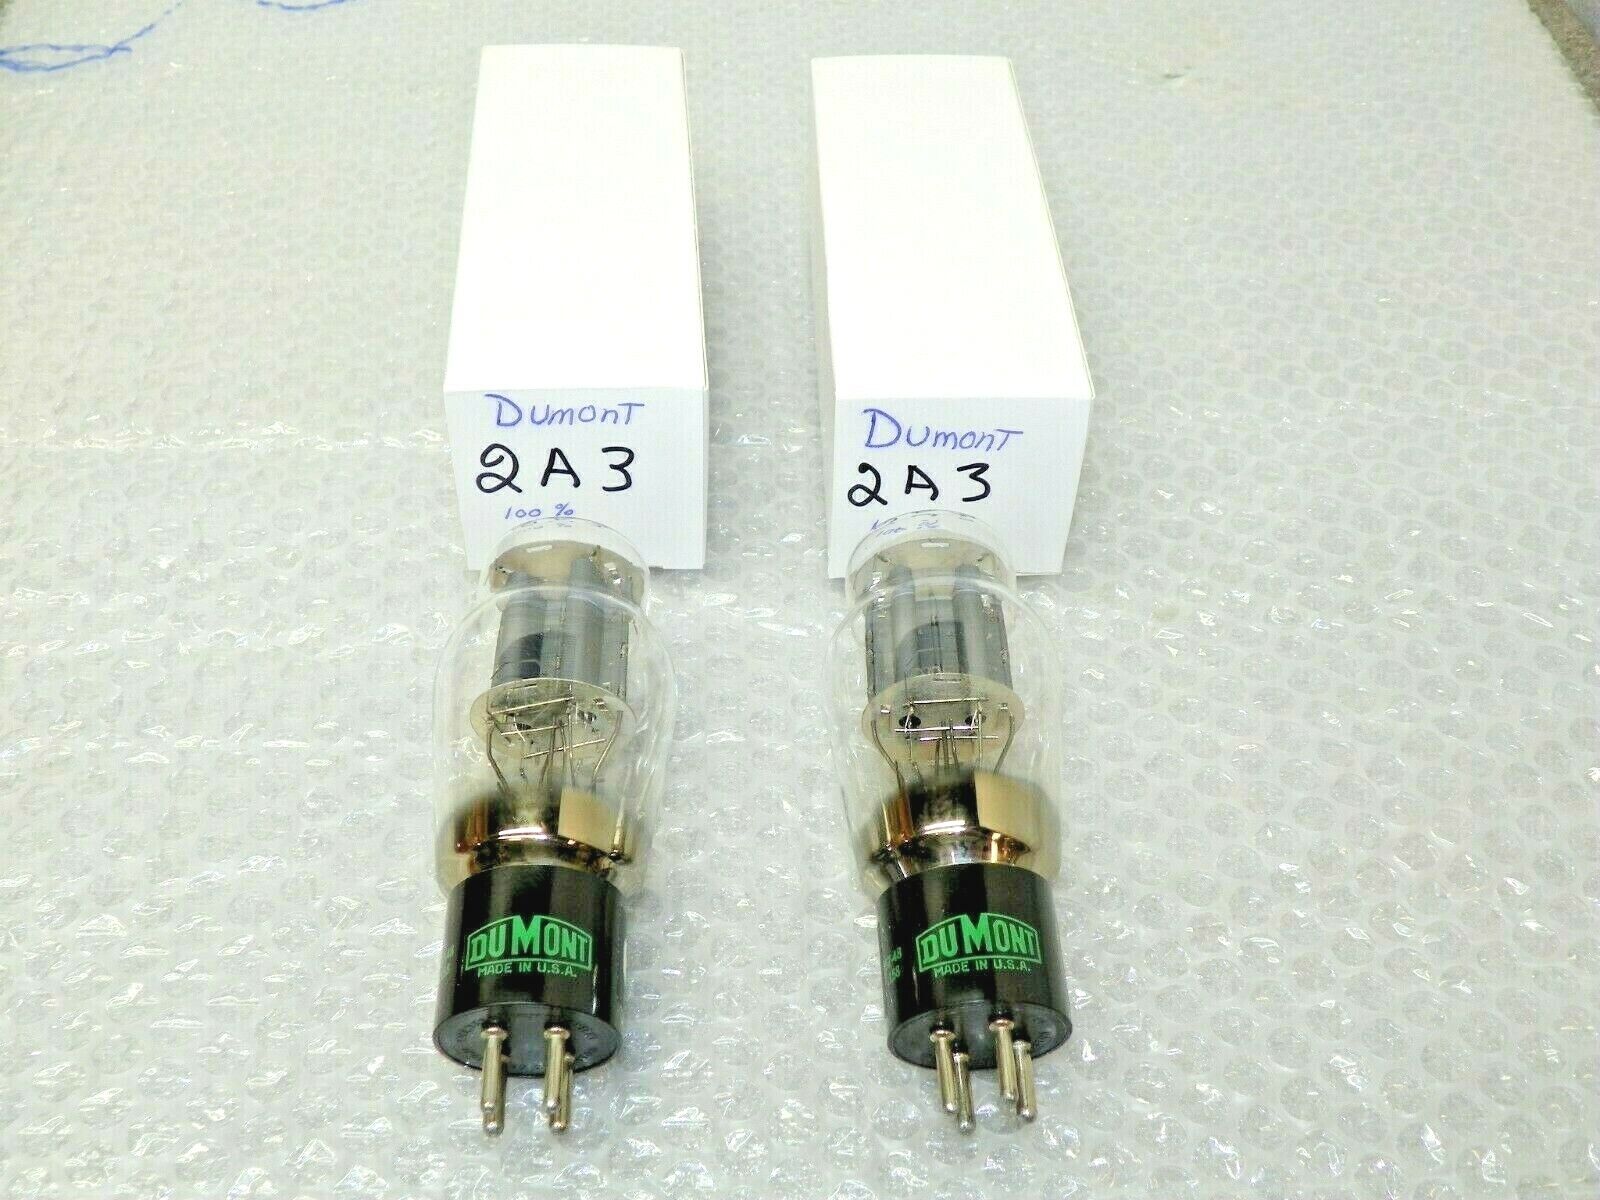 DUMONT 2A3 Vacuum Tubes (2) Tested 100%  Test at 6500 and 7700 gm DUMONT 2A3